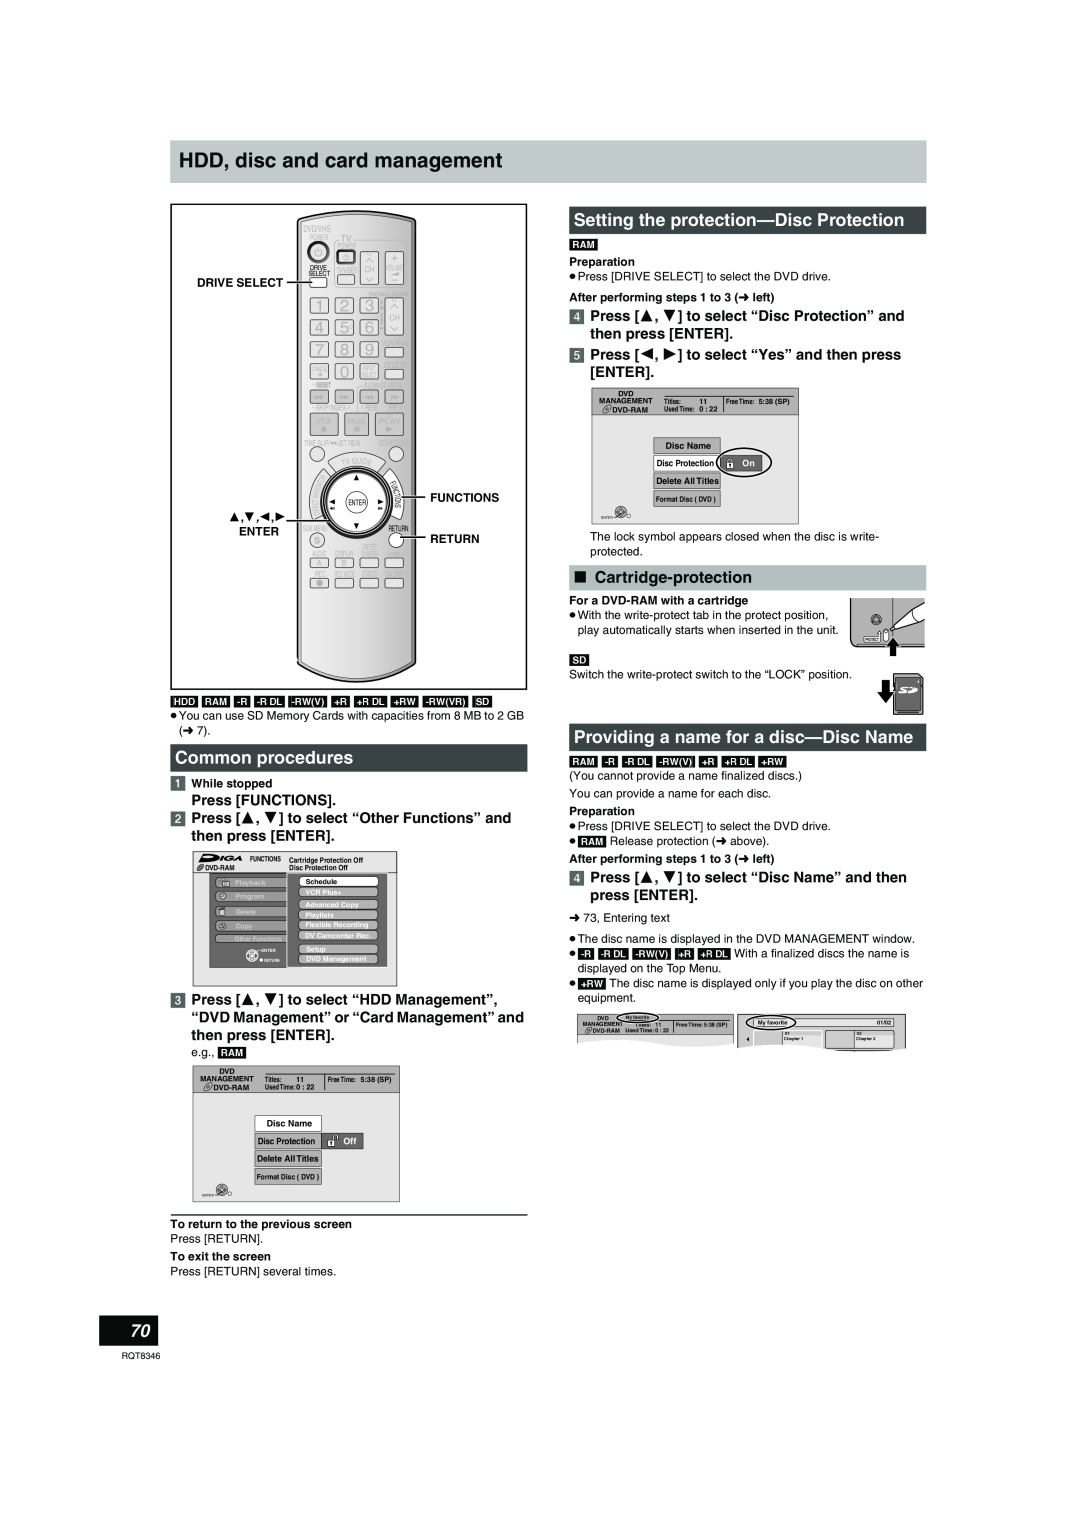 Panasonic DMR-EH75V HDD, disc and card management, Common procedures, ∫ Cartridge-protection, Press FUNCTIONS, Functions 